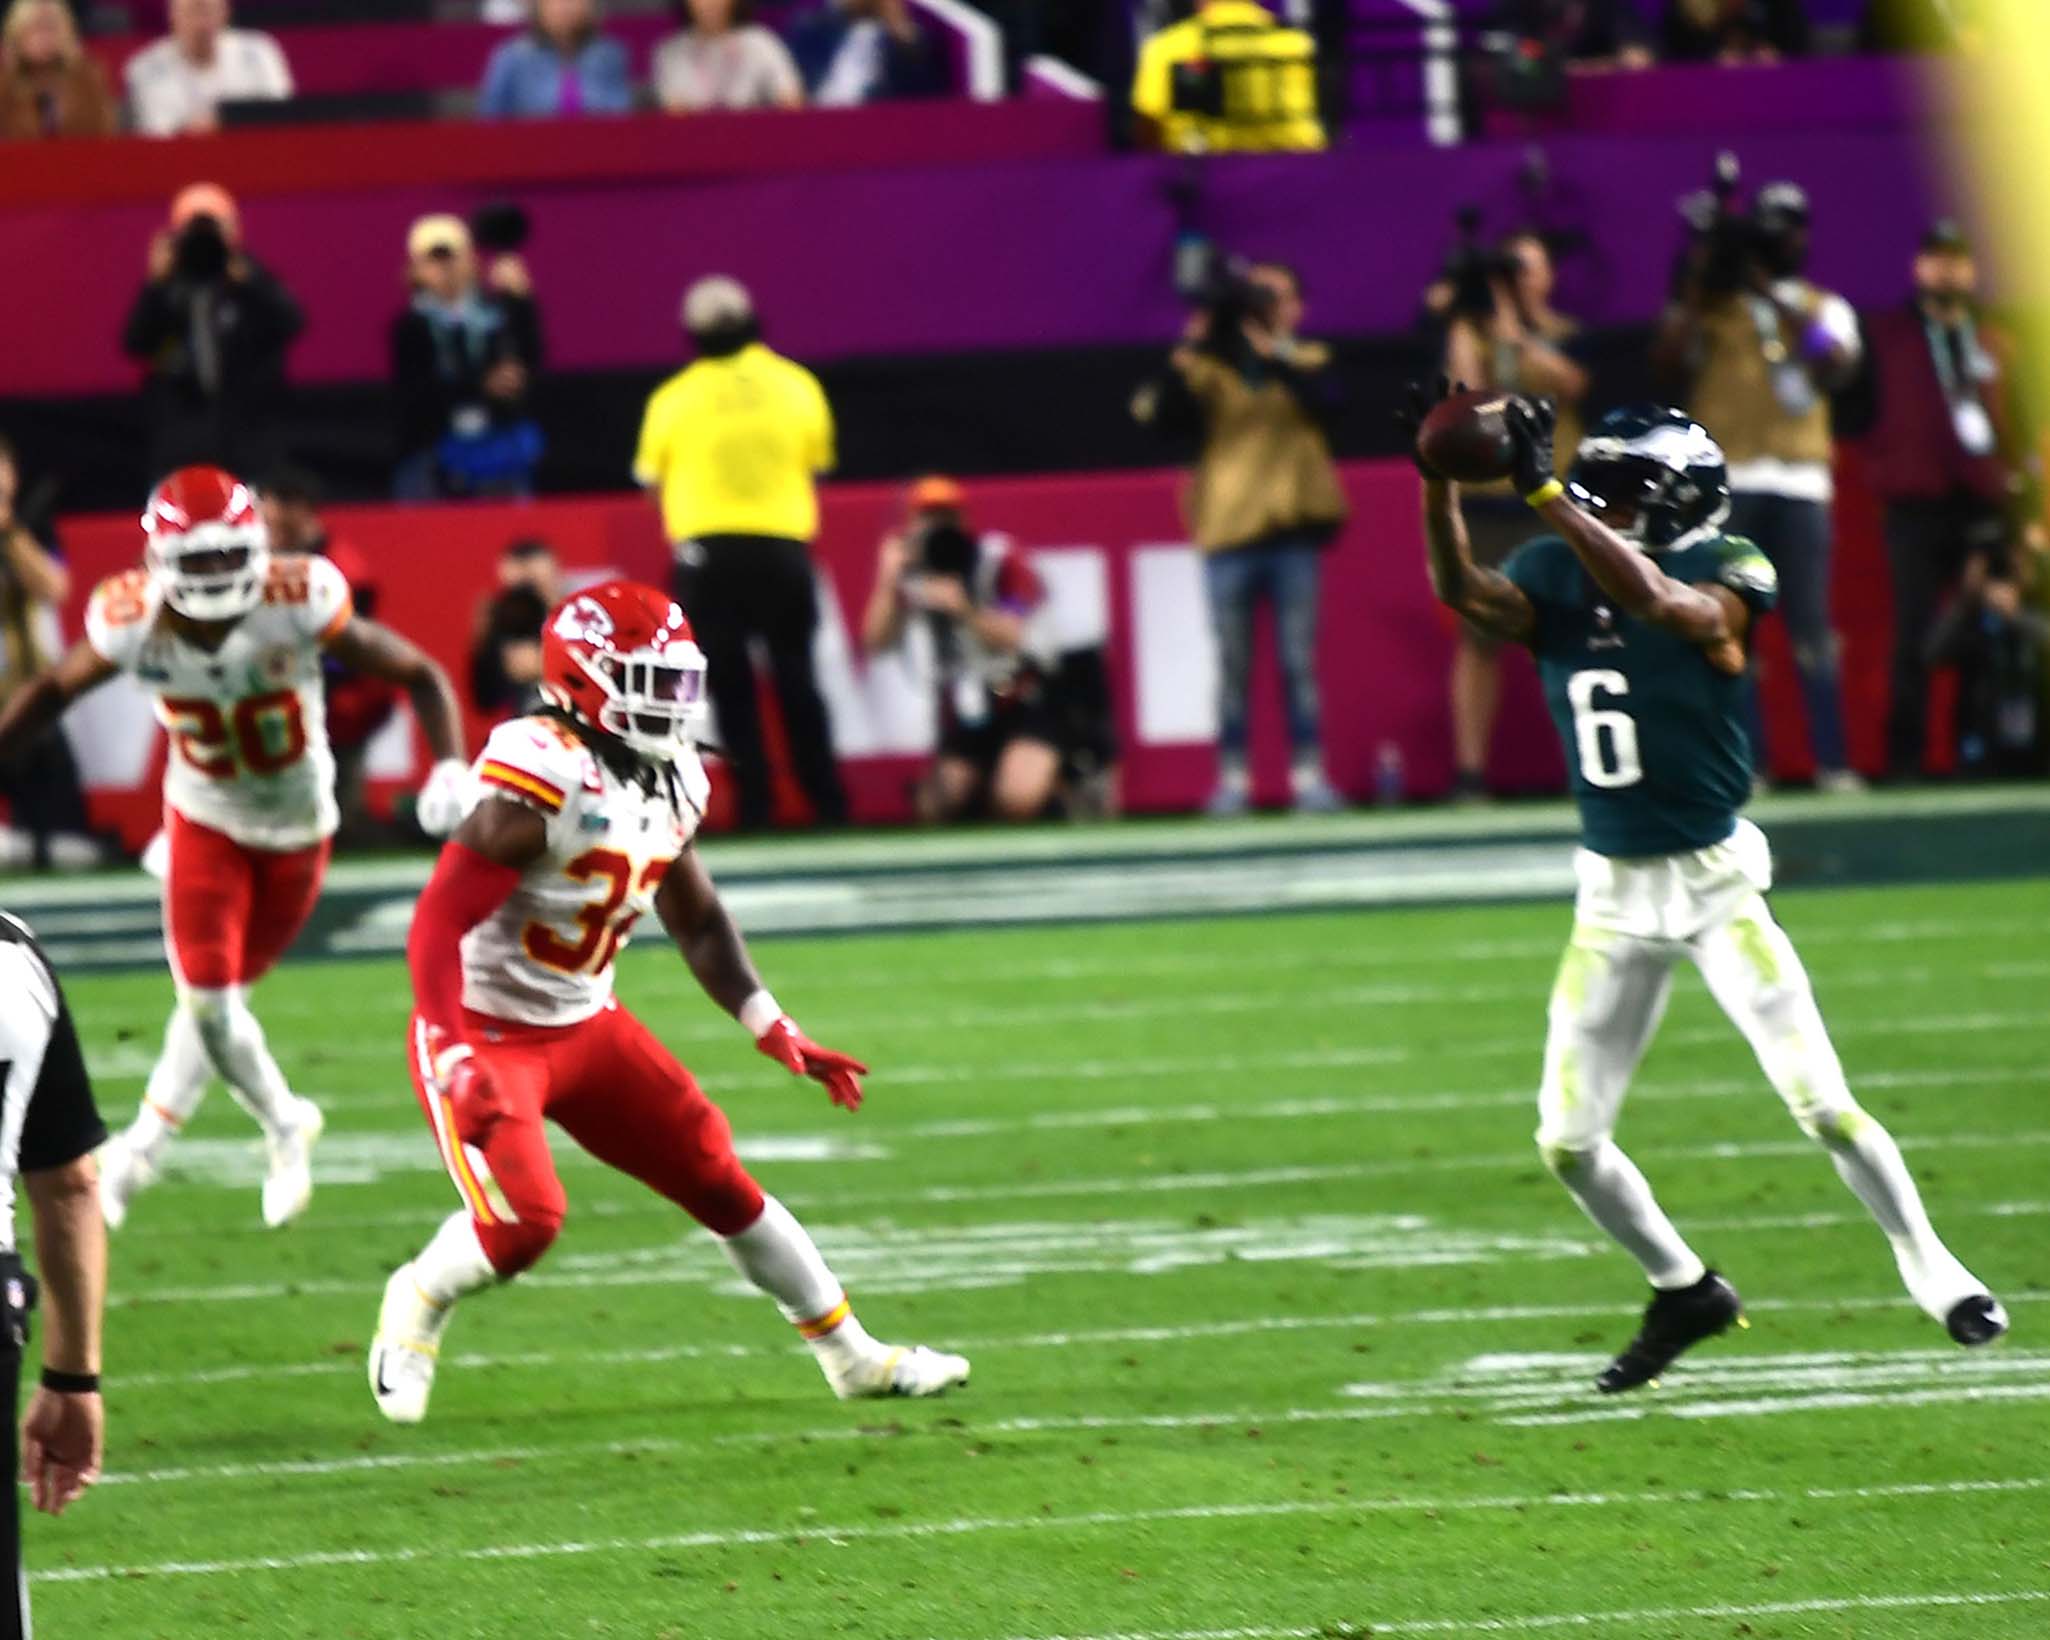 Philadelphia Eagles wide receiver, DeVONTA SMITH receives a JALEN HURTS pass at the end of the second quarter. The Chiefs went on to win 38-35 on a last miinute field goal.